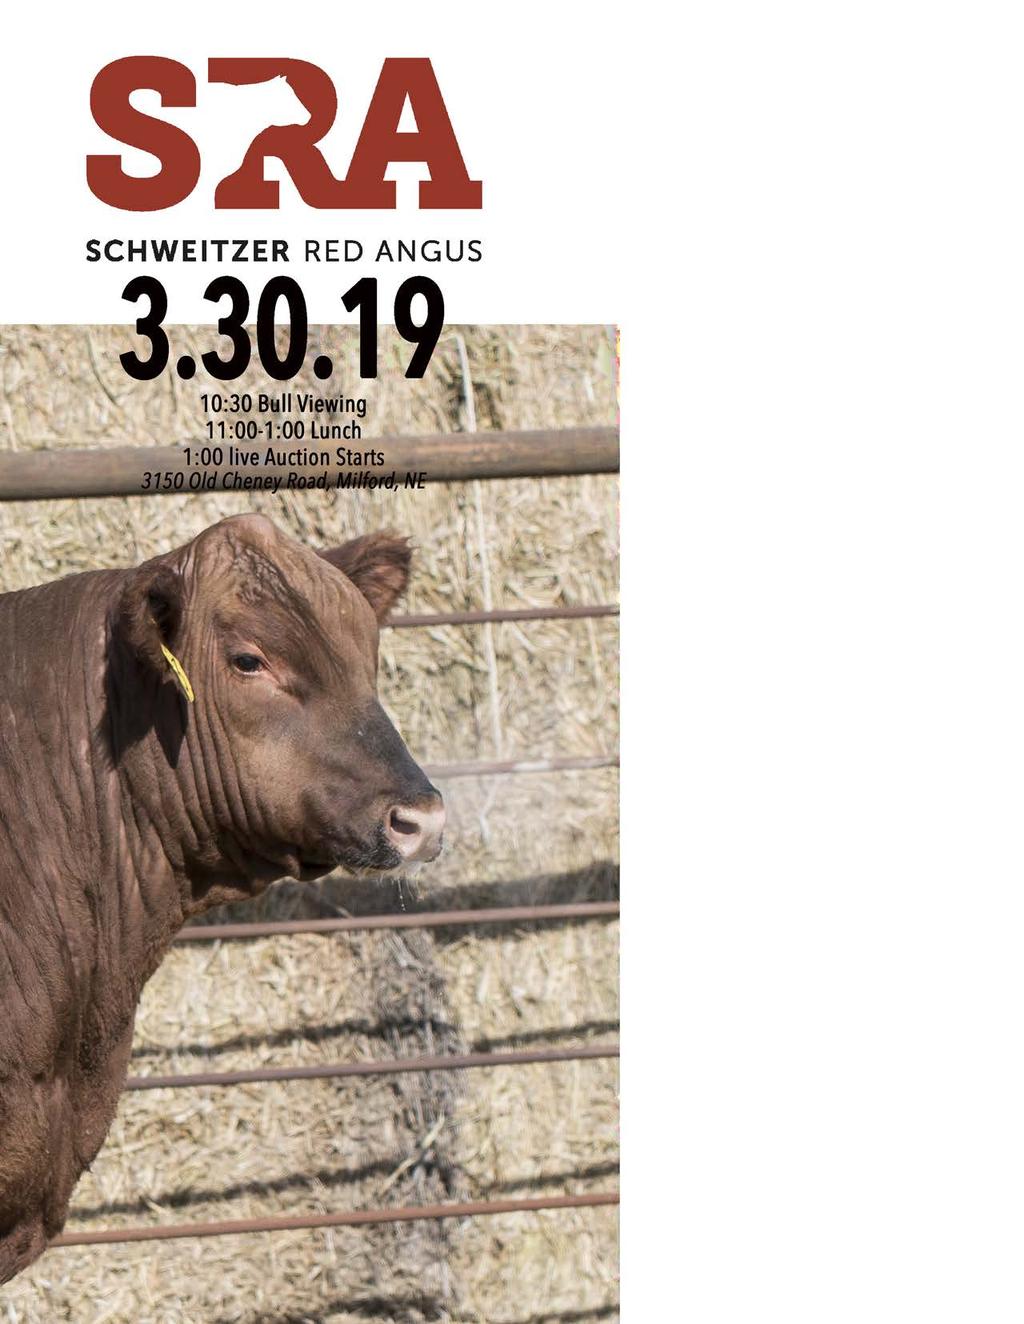 Contact Us: Austin Schweitzer - 402.641.8275 Jay Wolverton - 402.641.3745 Bob Wehrs - 402.641.1111 (On site at Bull Test) Sale Details: Sale will be March 30 in Milford NE at 3150 Old Cheney Road.